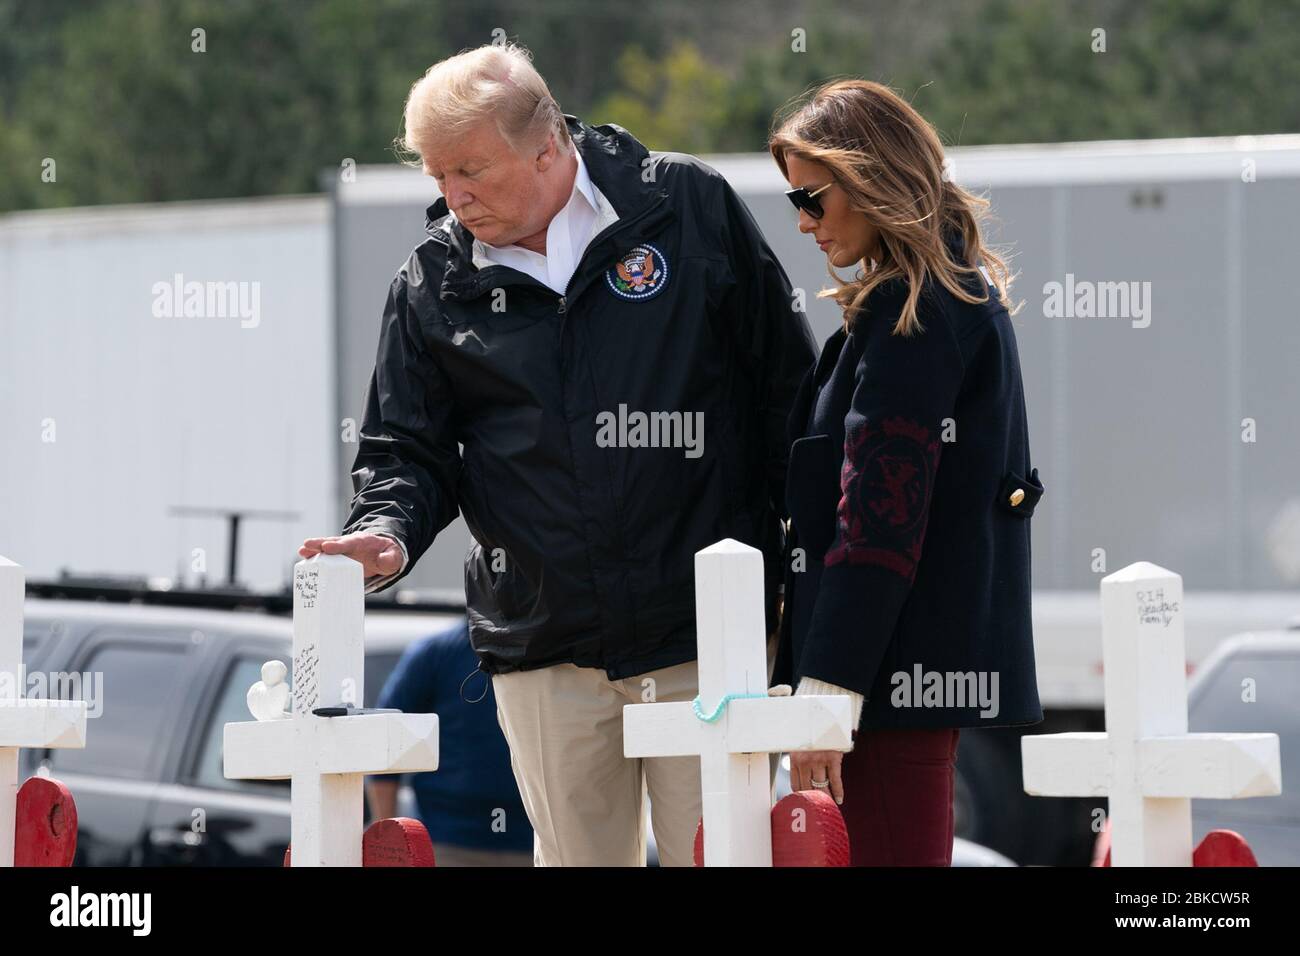 President Donald J. Trump and First Lady Melania Trump visit Lee County Alabama Friday, March 8, 2019 President Trump and First Lady Melania Trump Visit Alabama Stock Photo